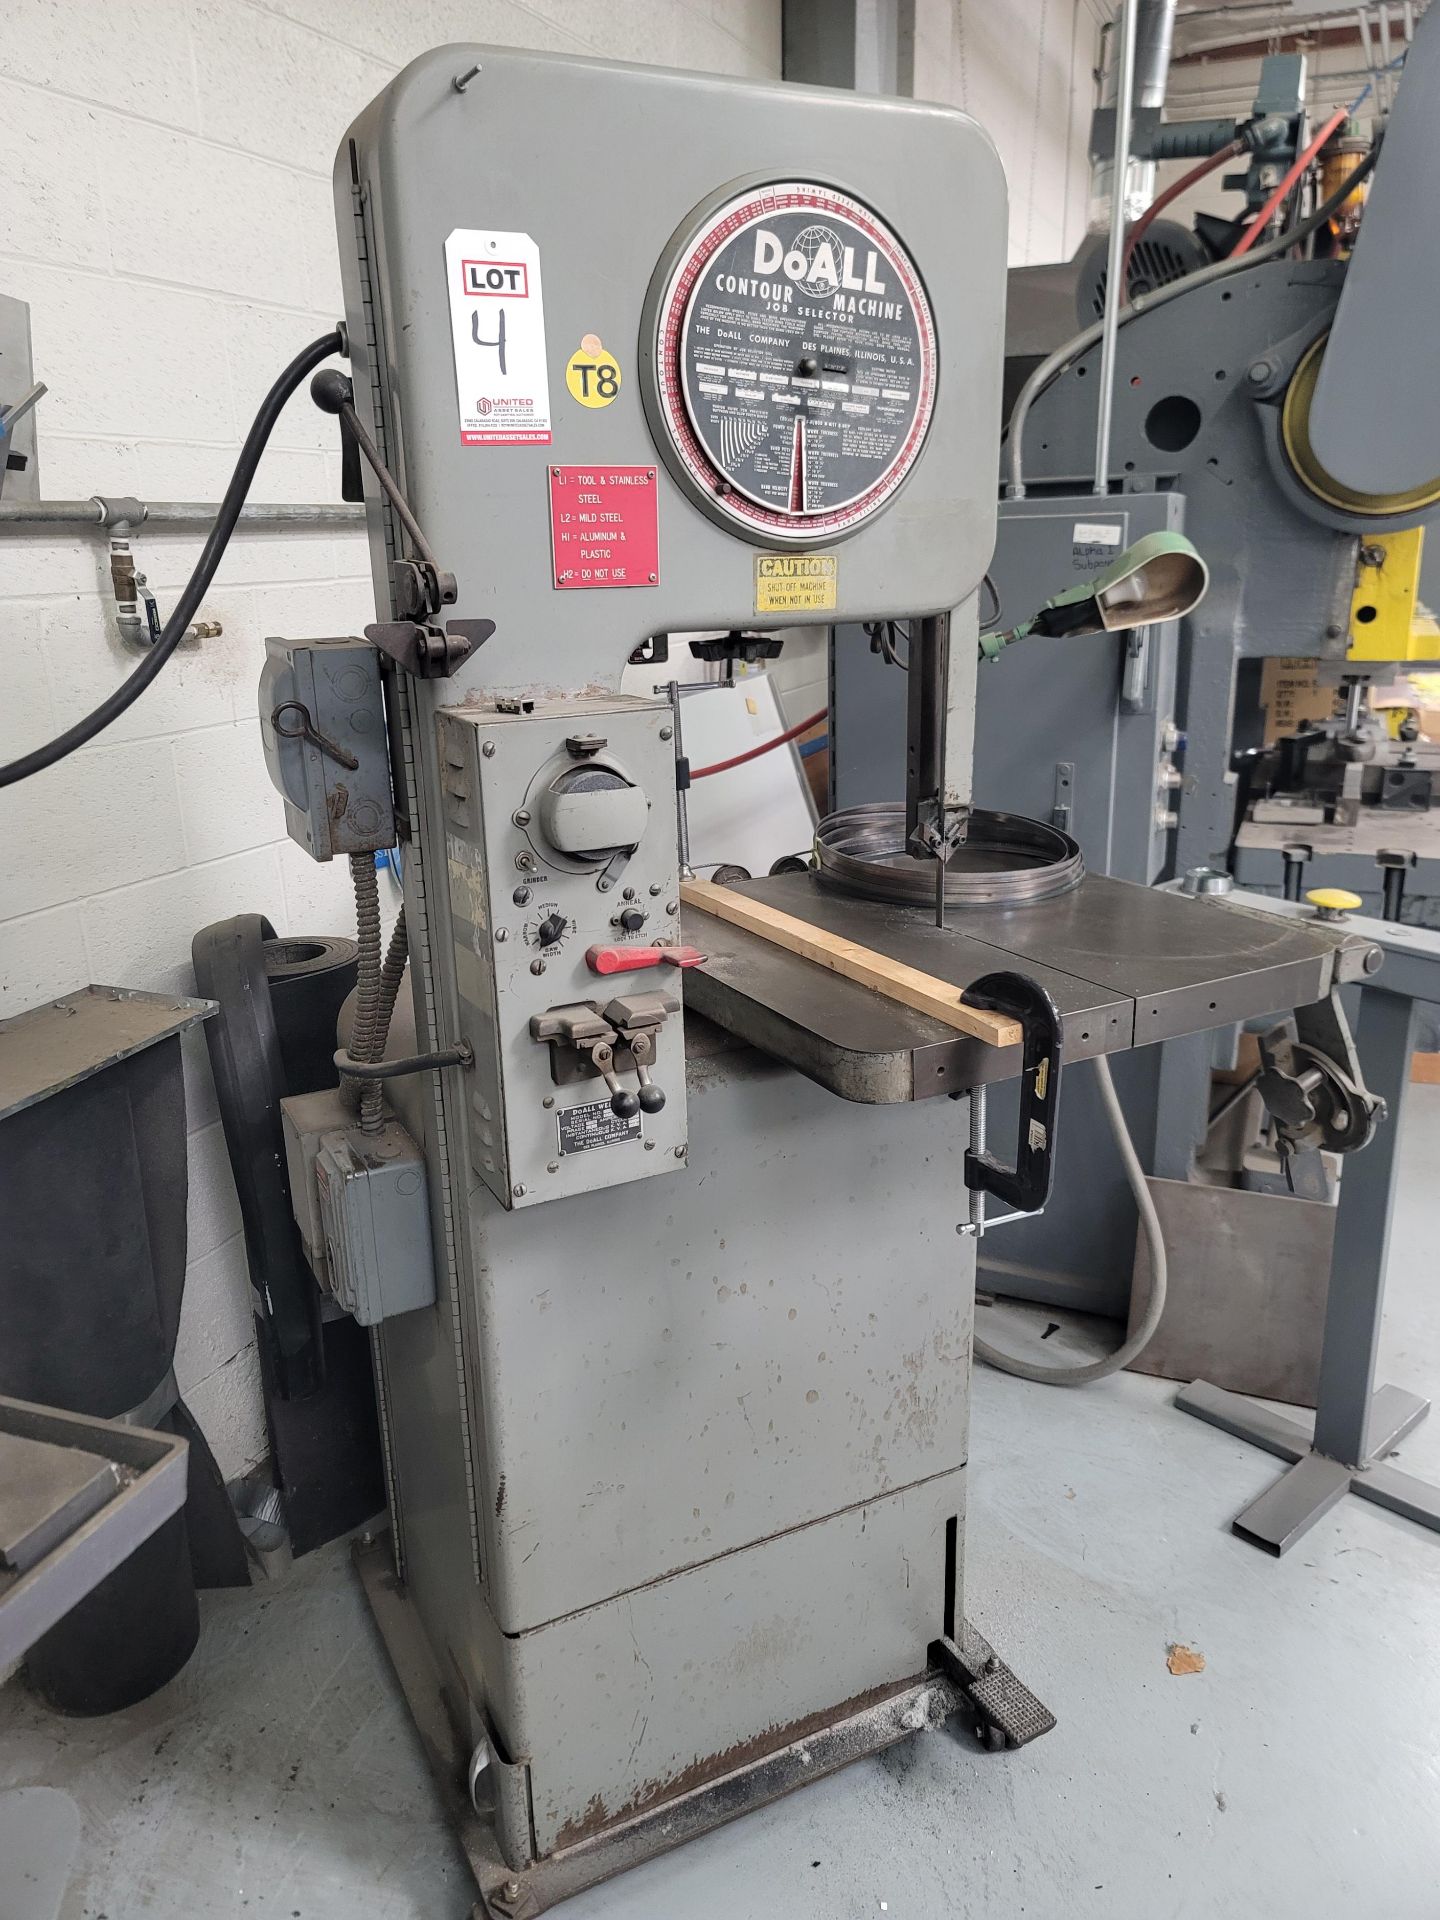 DOALL CONTOUR MACHINE/VERTICAL BAND SAW, MODEL 16-SFP, S/N 79-561269 - Image 2 of 4